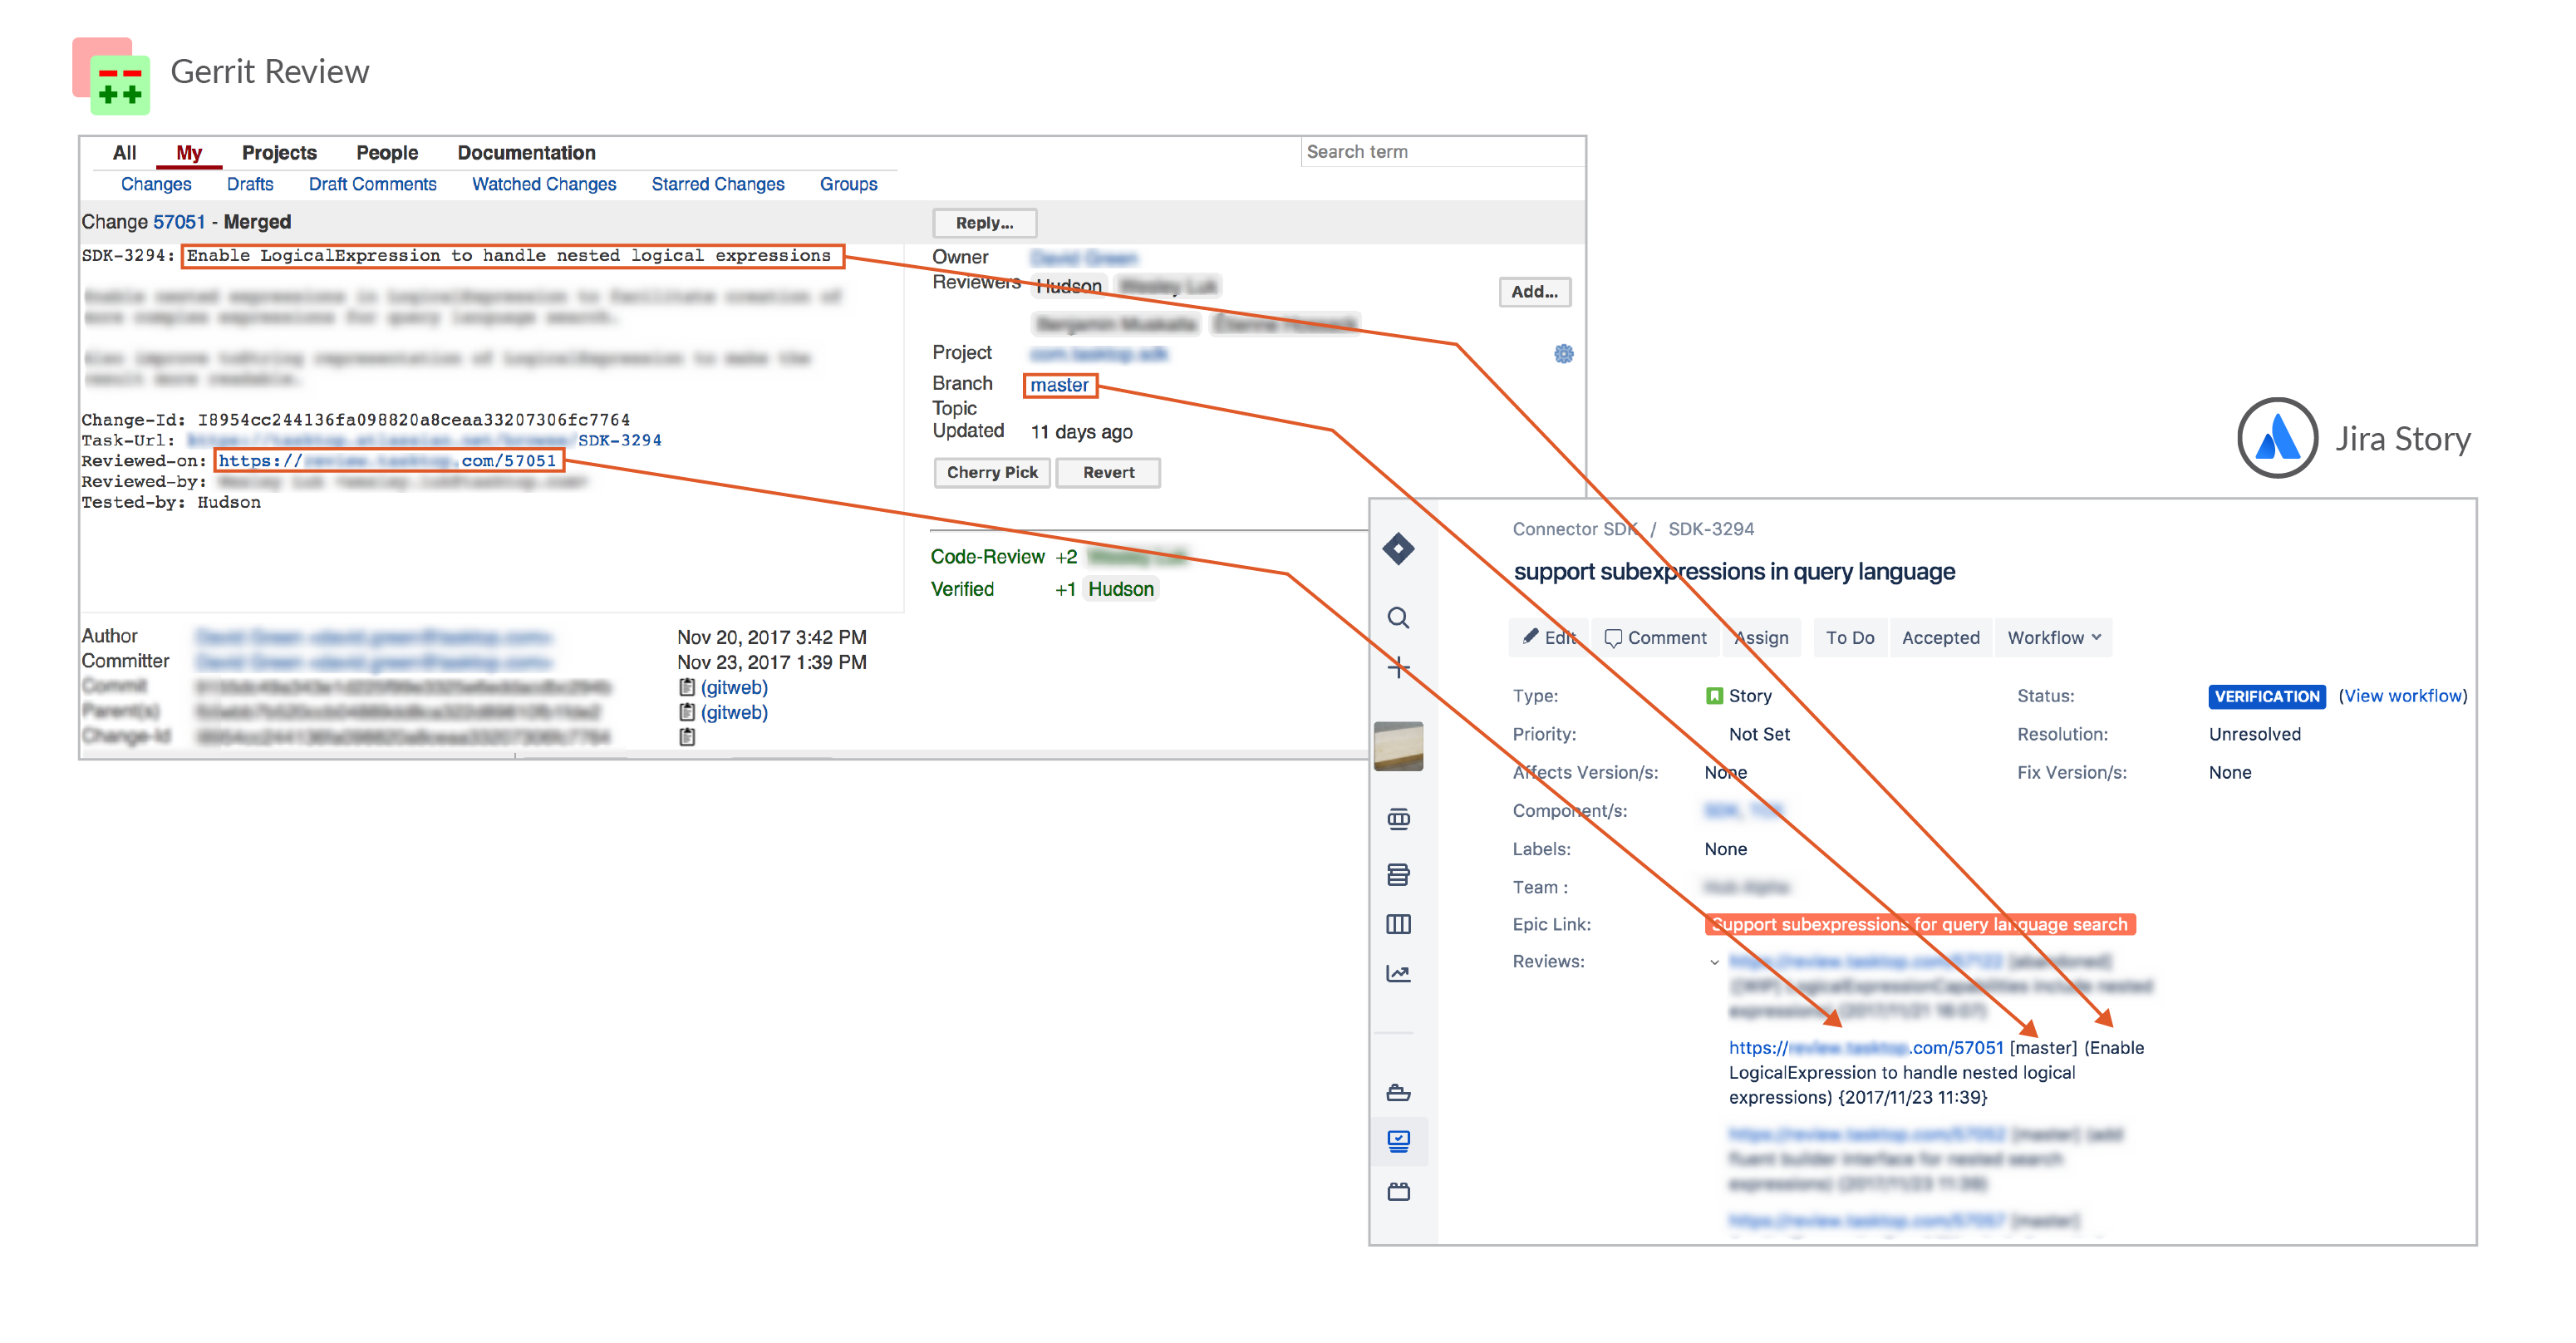 Synchronized Changesets and Jira Artifacts